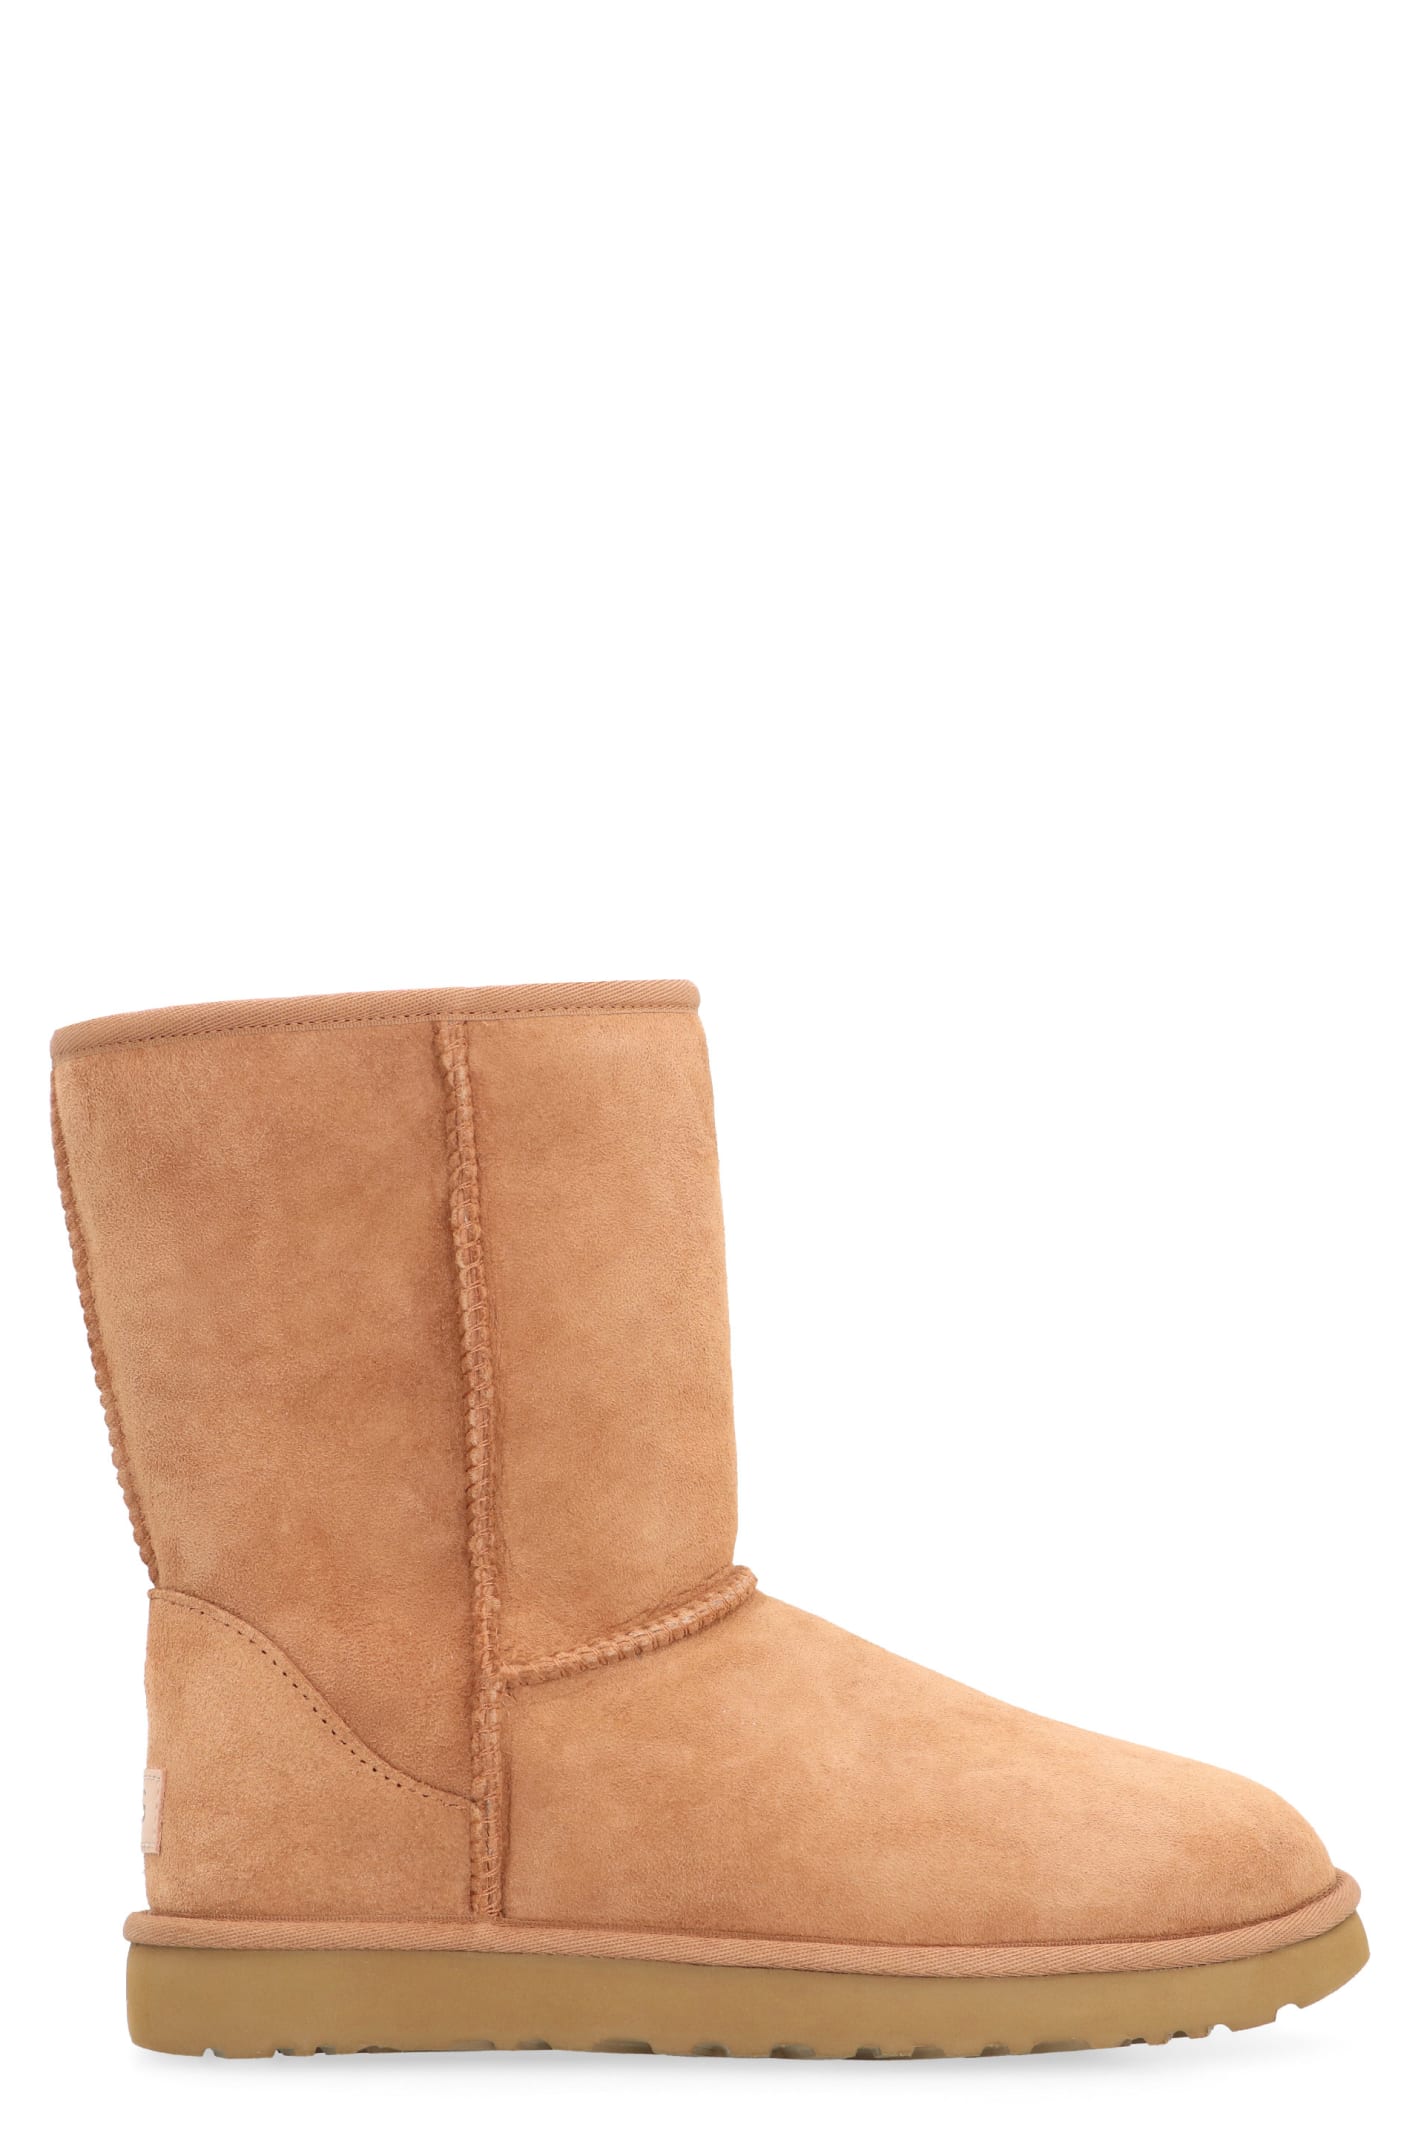 Shop Ugg Classic Short Ii Ankle Boots In Chestnut